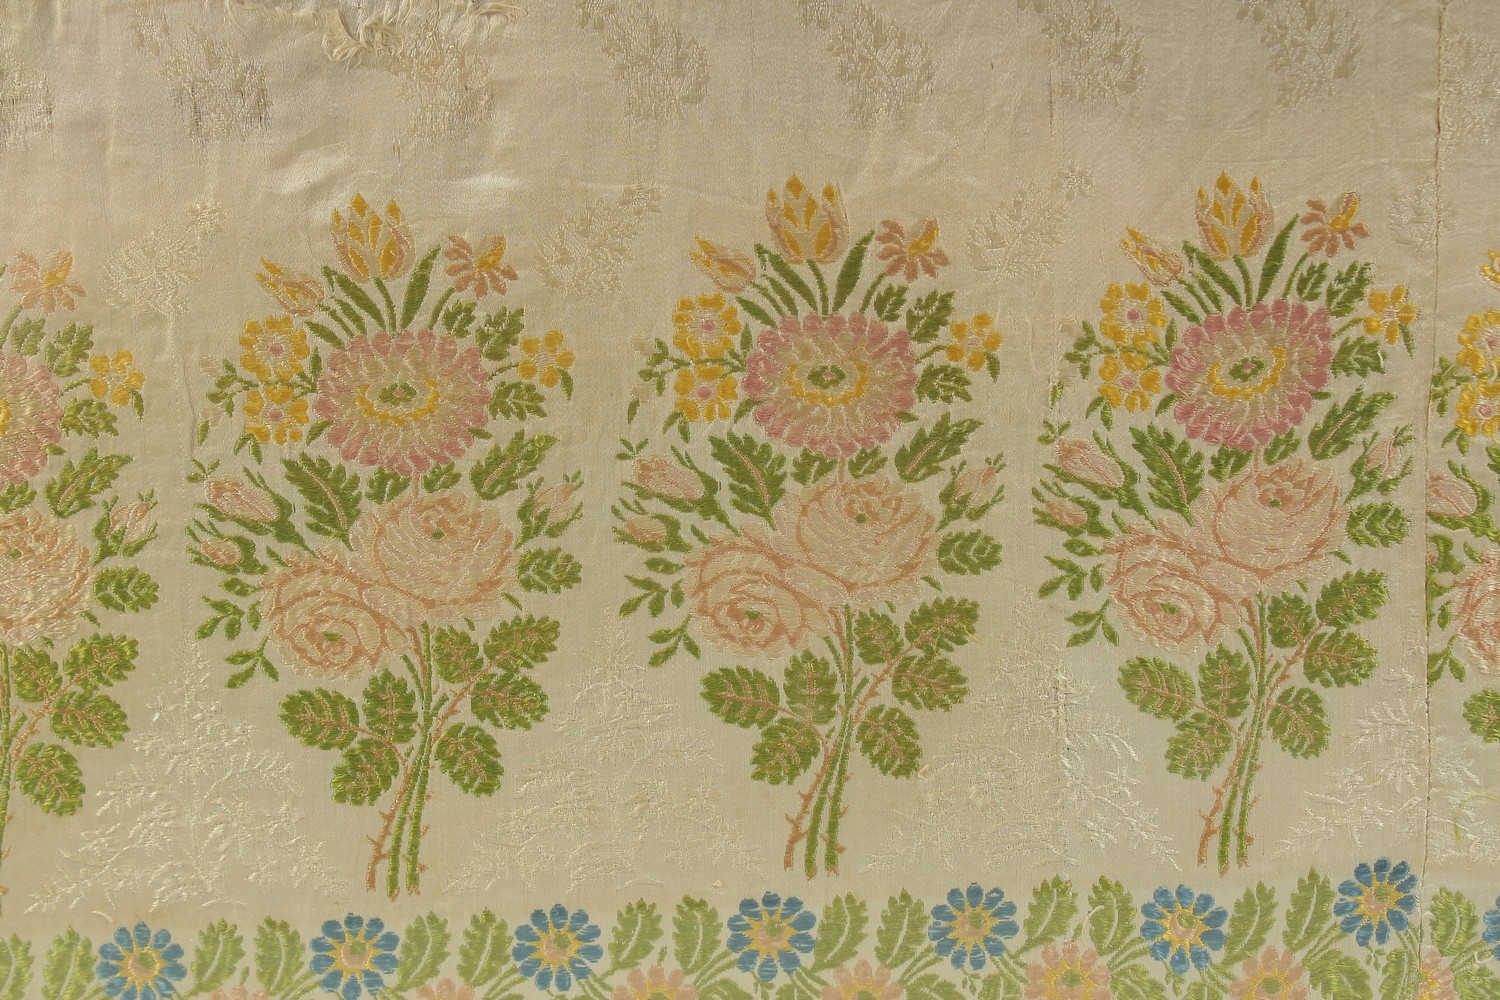 A FINE 19TH CENTURY INDIAN SILK EMBROIDERY, framed and glazed, 85cm x 52cm overall. - Image 2 of 2